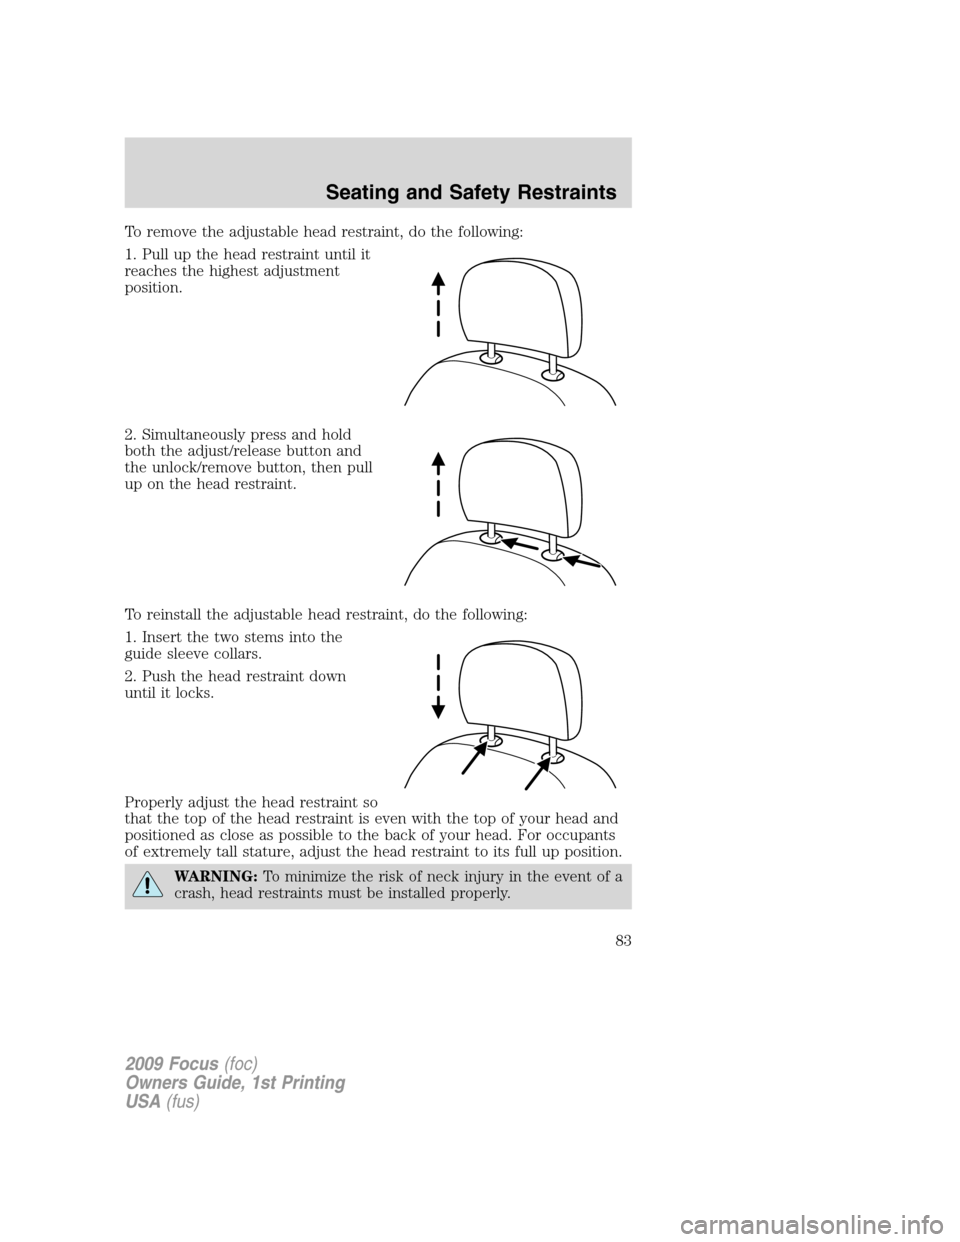 FORD FOCUS 2009 2.G Owners Manual To remove the adjustable head restraint, do the following:
1. Pull up the head restraint until it
reaches the highest adjustment
position.
2. Simultaneously press and hold
both the adjust/release butt